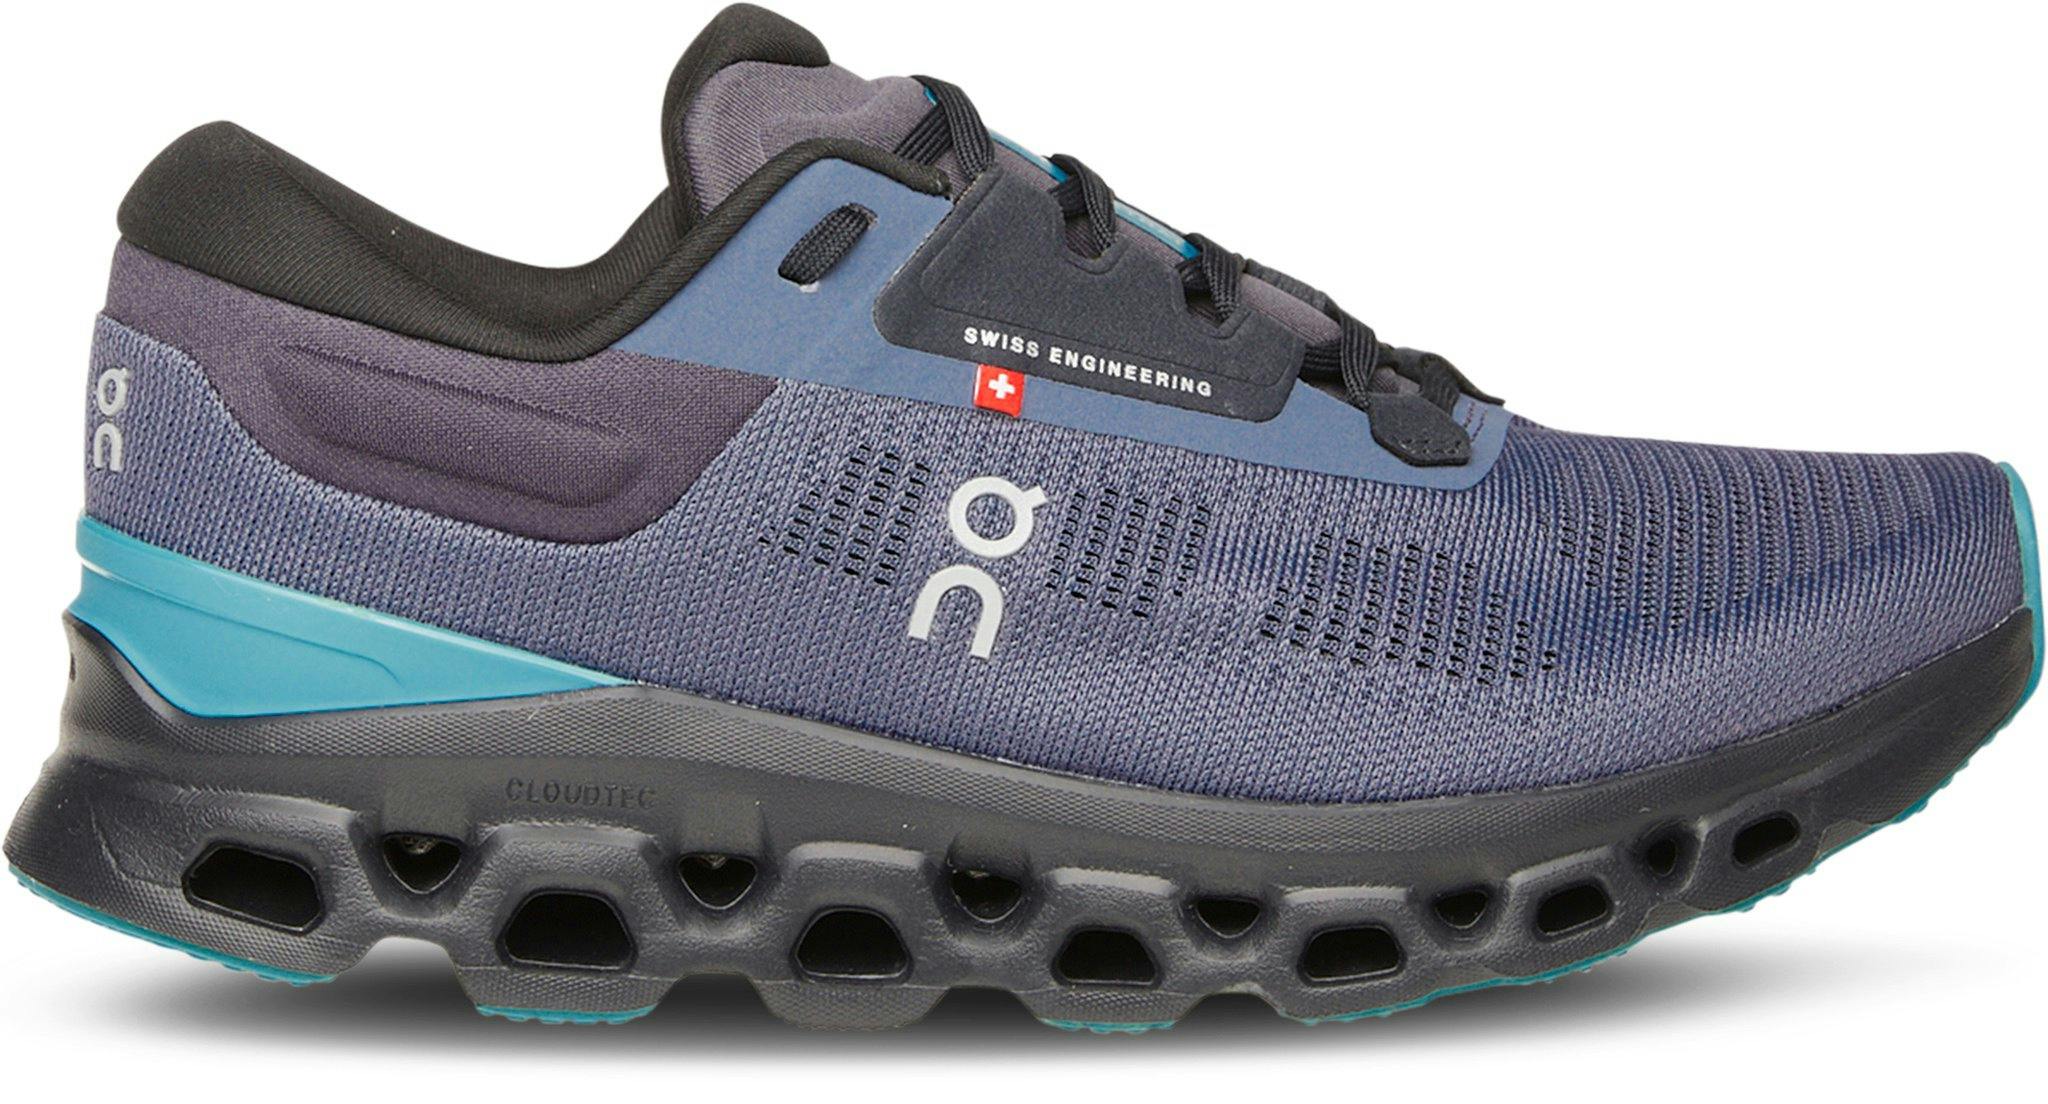 Product image for Cloudstratus 3 Running Shoes - Men's